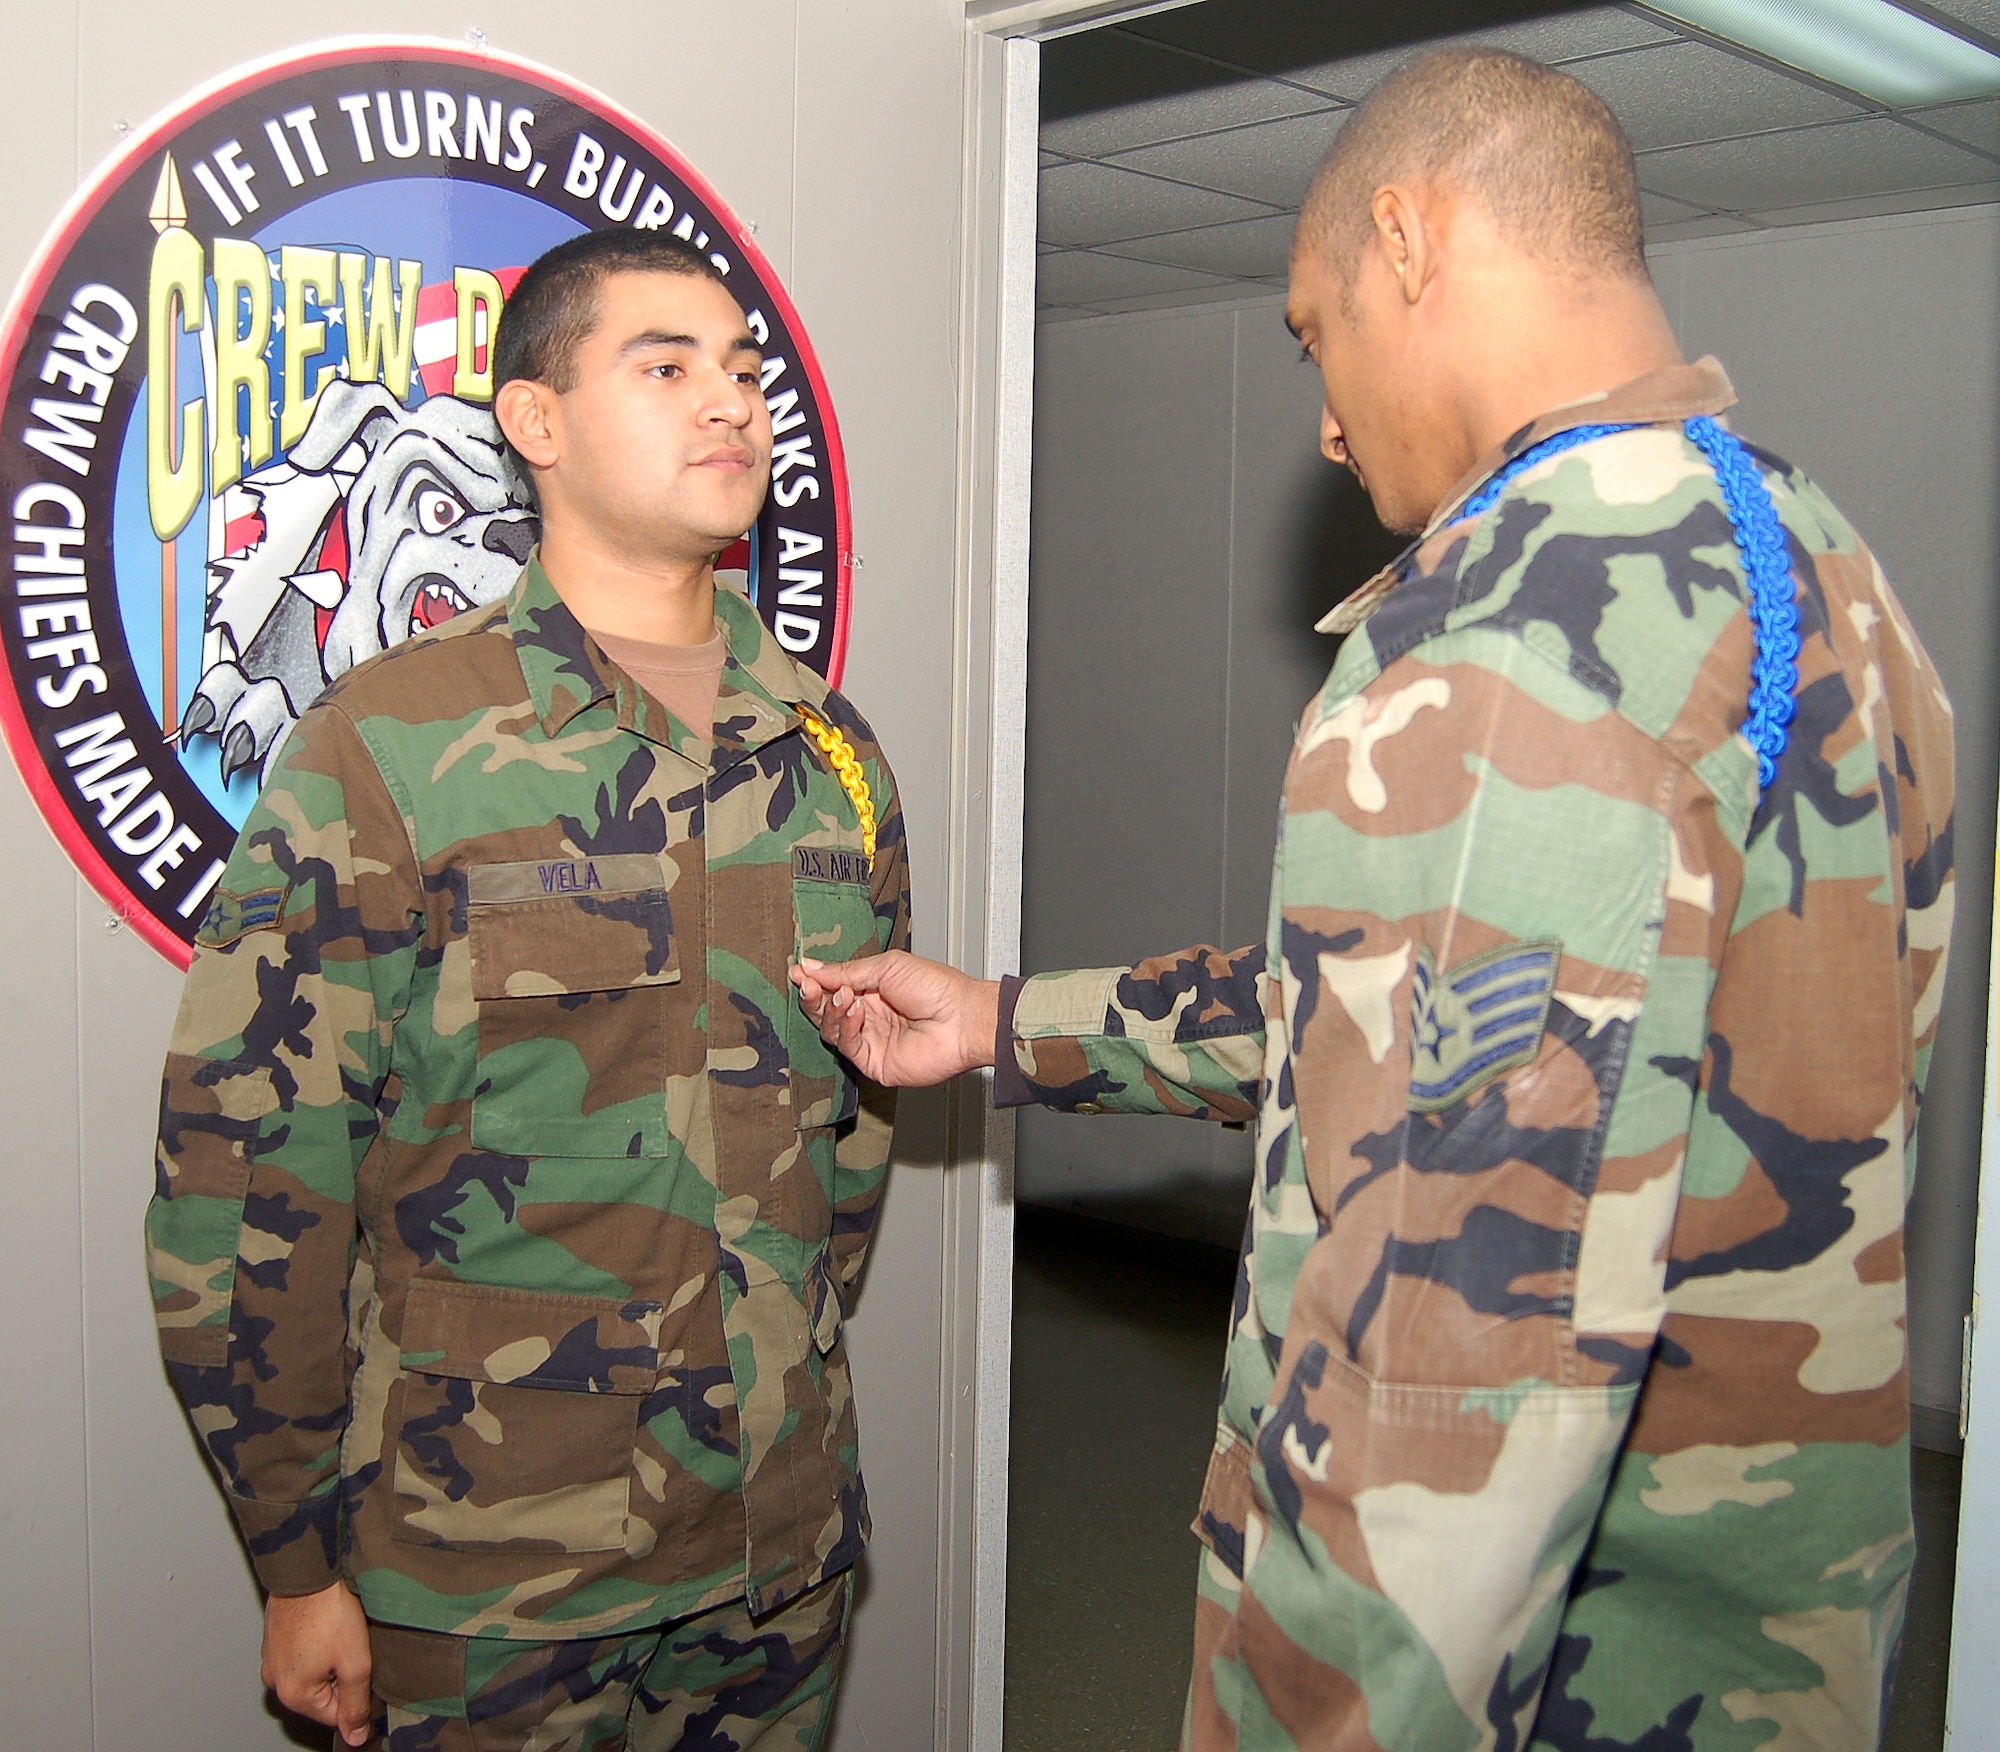 DOVER AIR FORCE BASE, Del.  Staff Sgt. Robert Jackson, 373rd Training Squadron MTL, inspects Airman 1st Class Carlos Vela, 373rd TRS student and student leader. Student leaders wear colored ropes to designate their position and play a large role in the developement of other students. (U.S. Air Force photo/Tech. Sgt. Kevin Wallace)